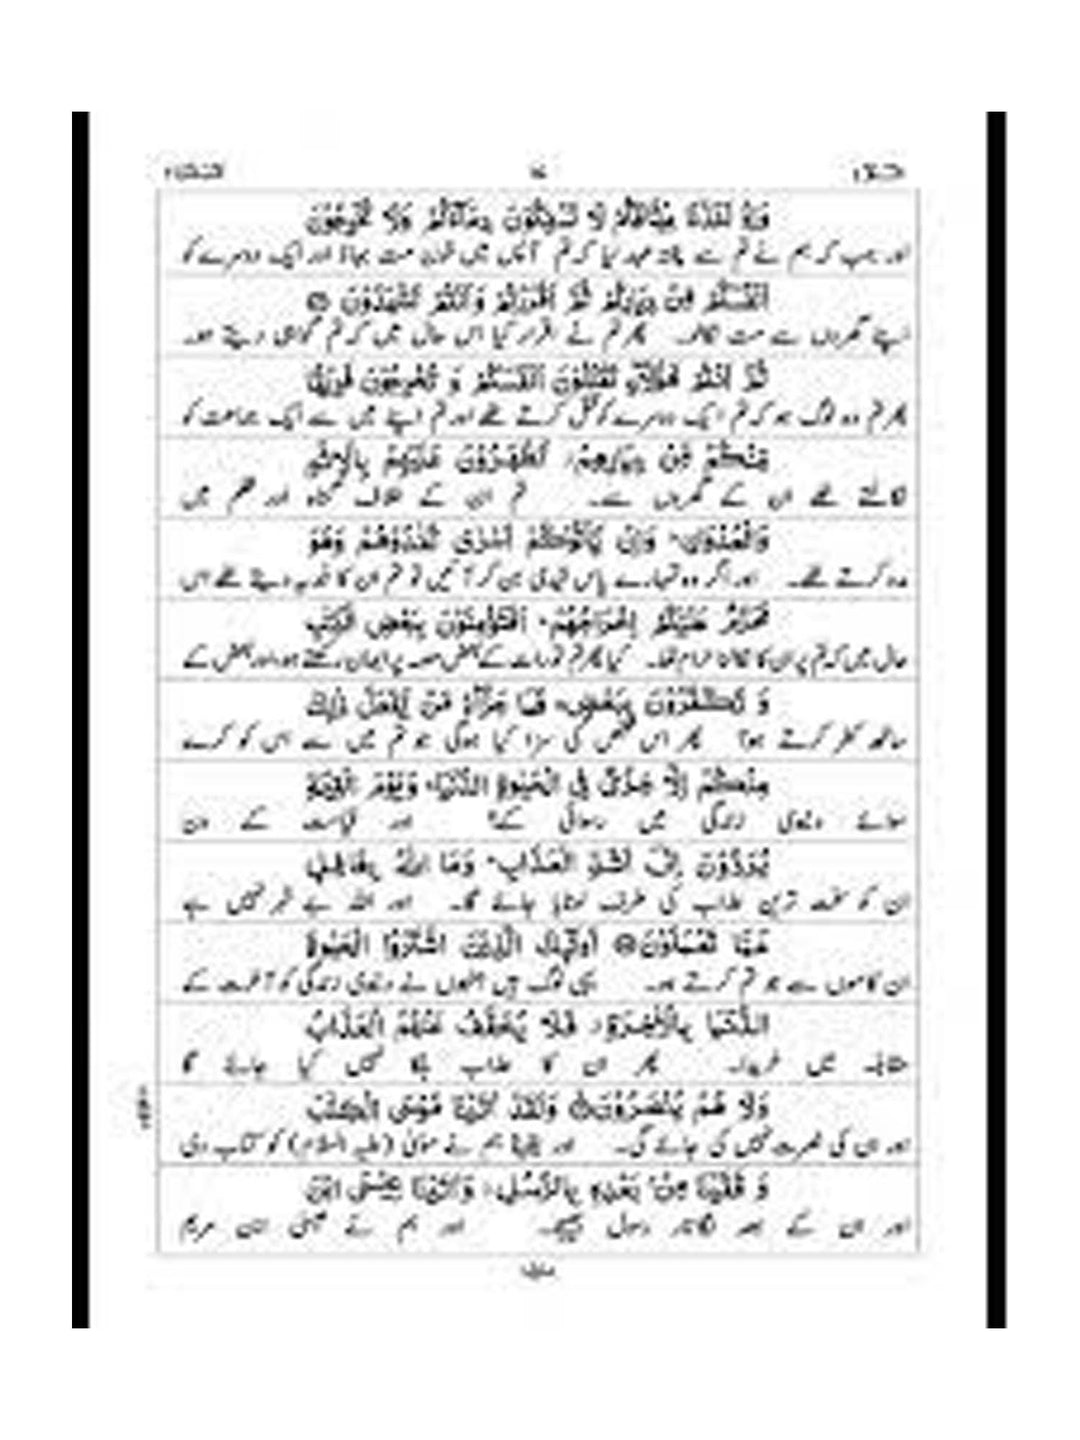 The Holy Quran - Adwa ul Bayan - With Urdu and translation (Large)